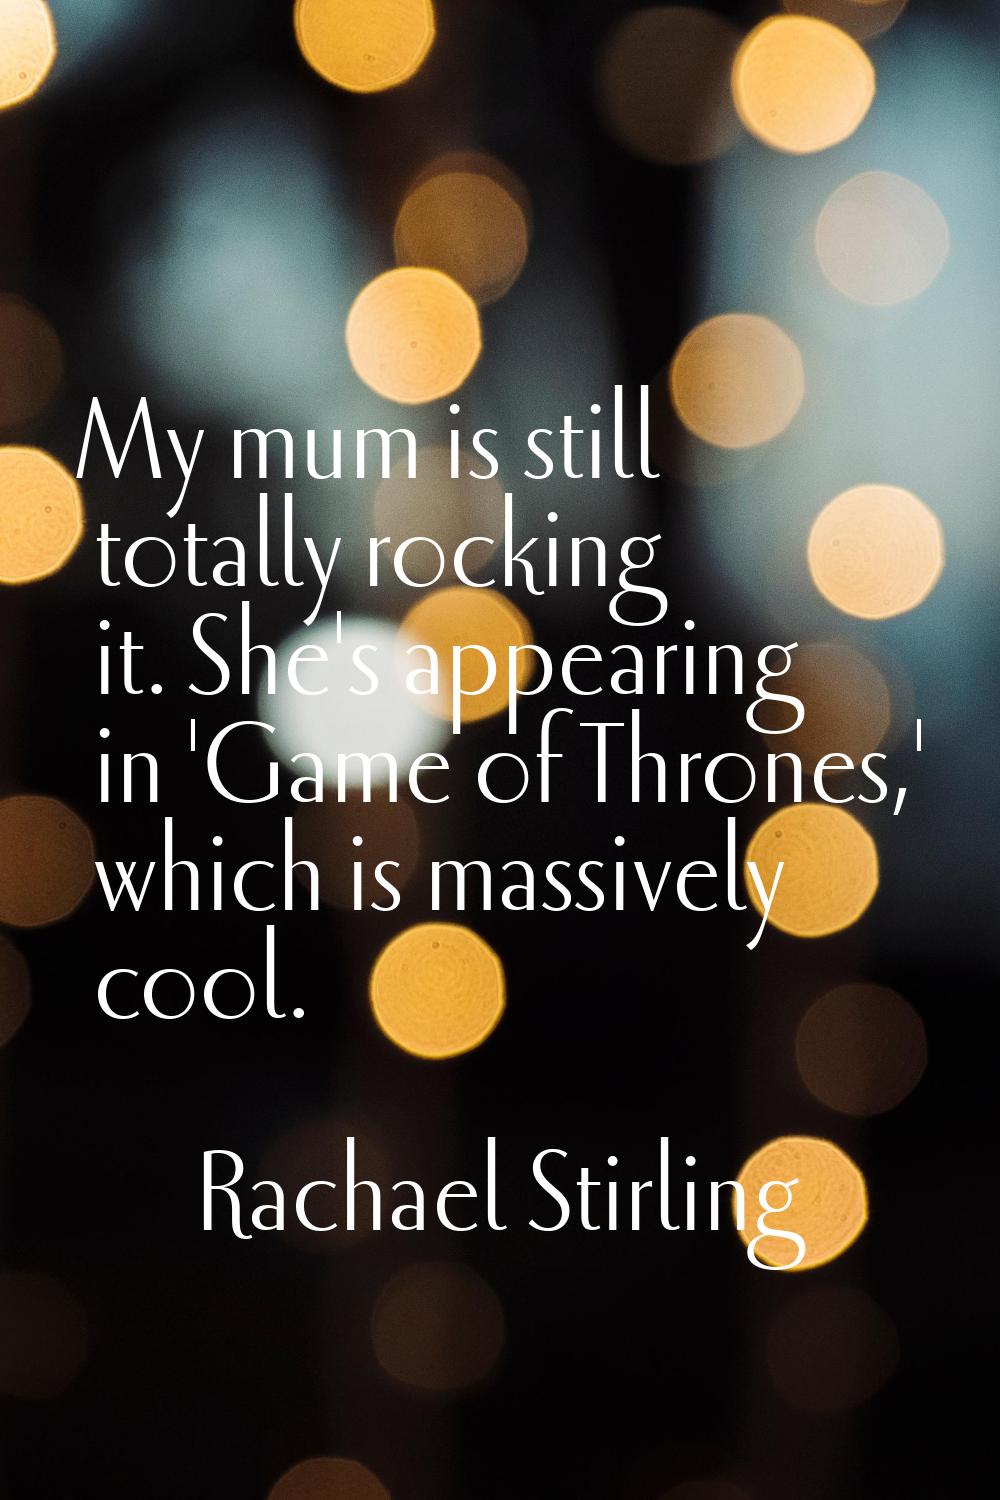 My mum is still totally rocking it. She's appearing in 'Game of Thrones,' which is massively cool.